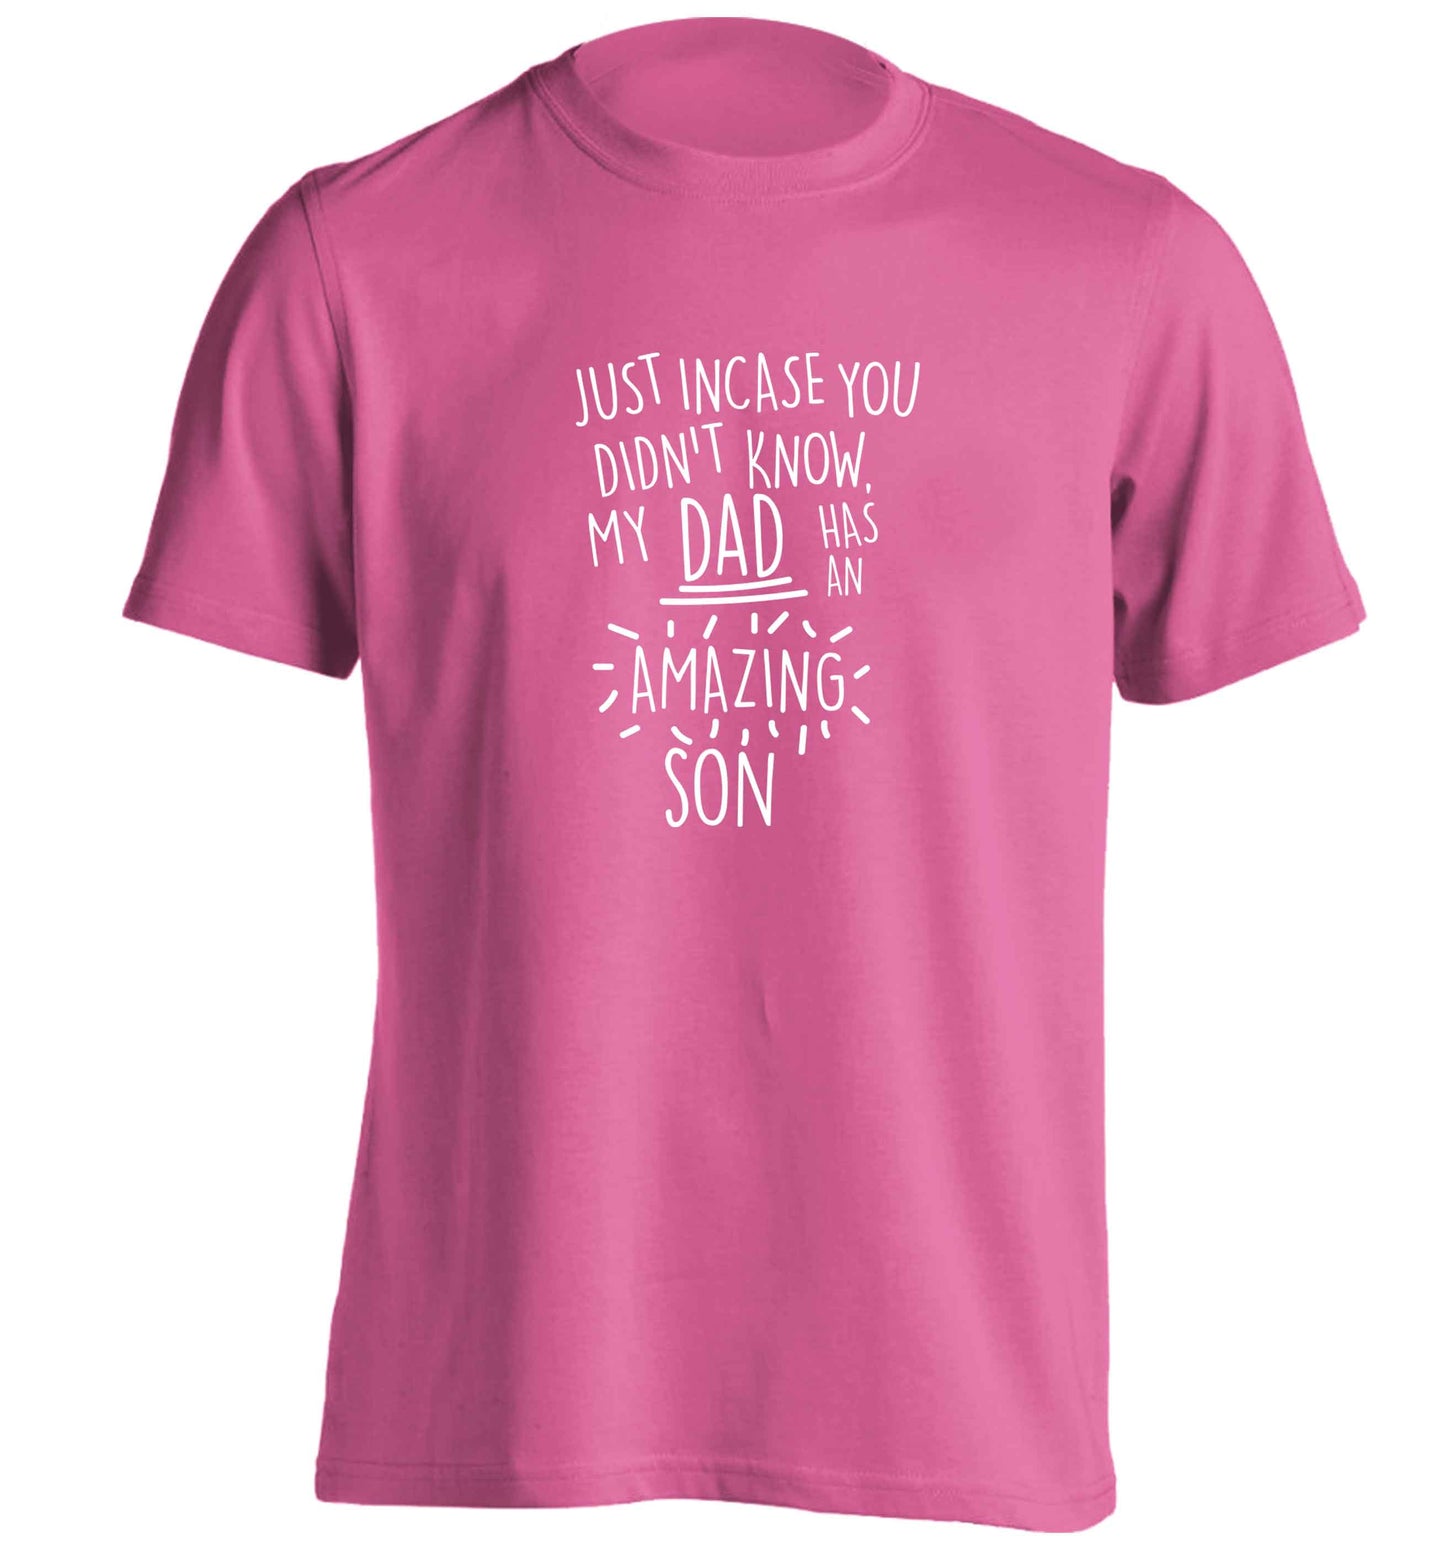 Just incase you didn't know my dad has an amazing son adults unisex pink Tshirt 2XL